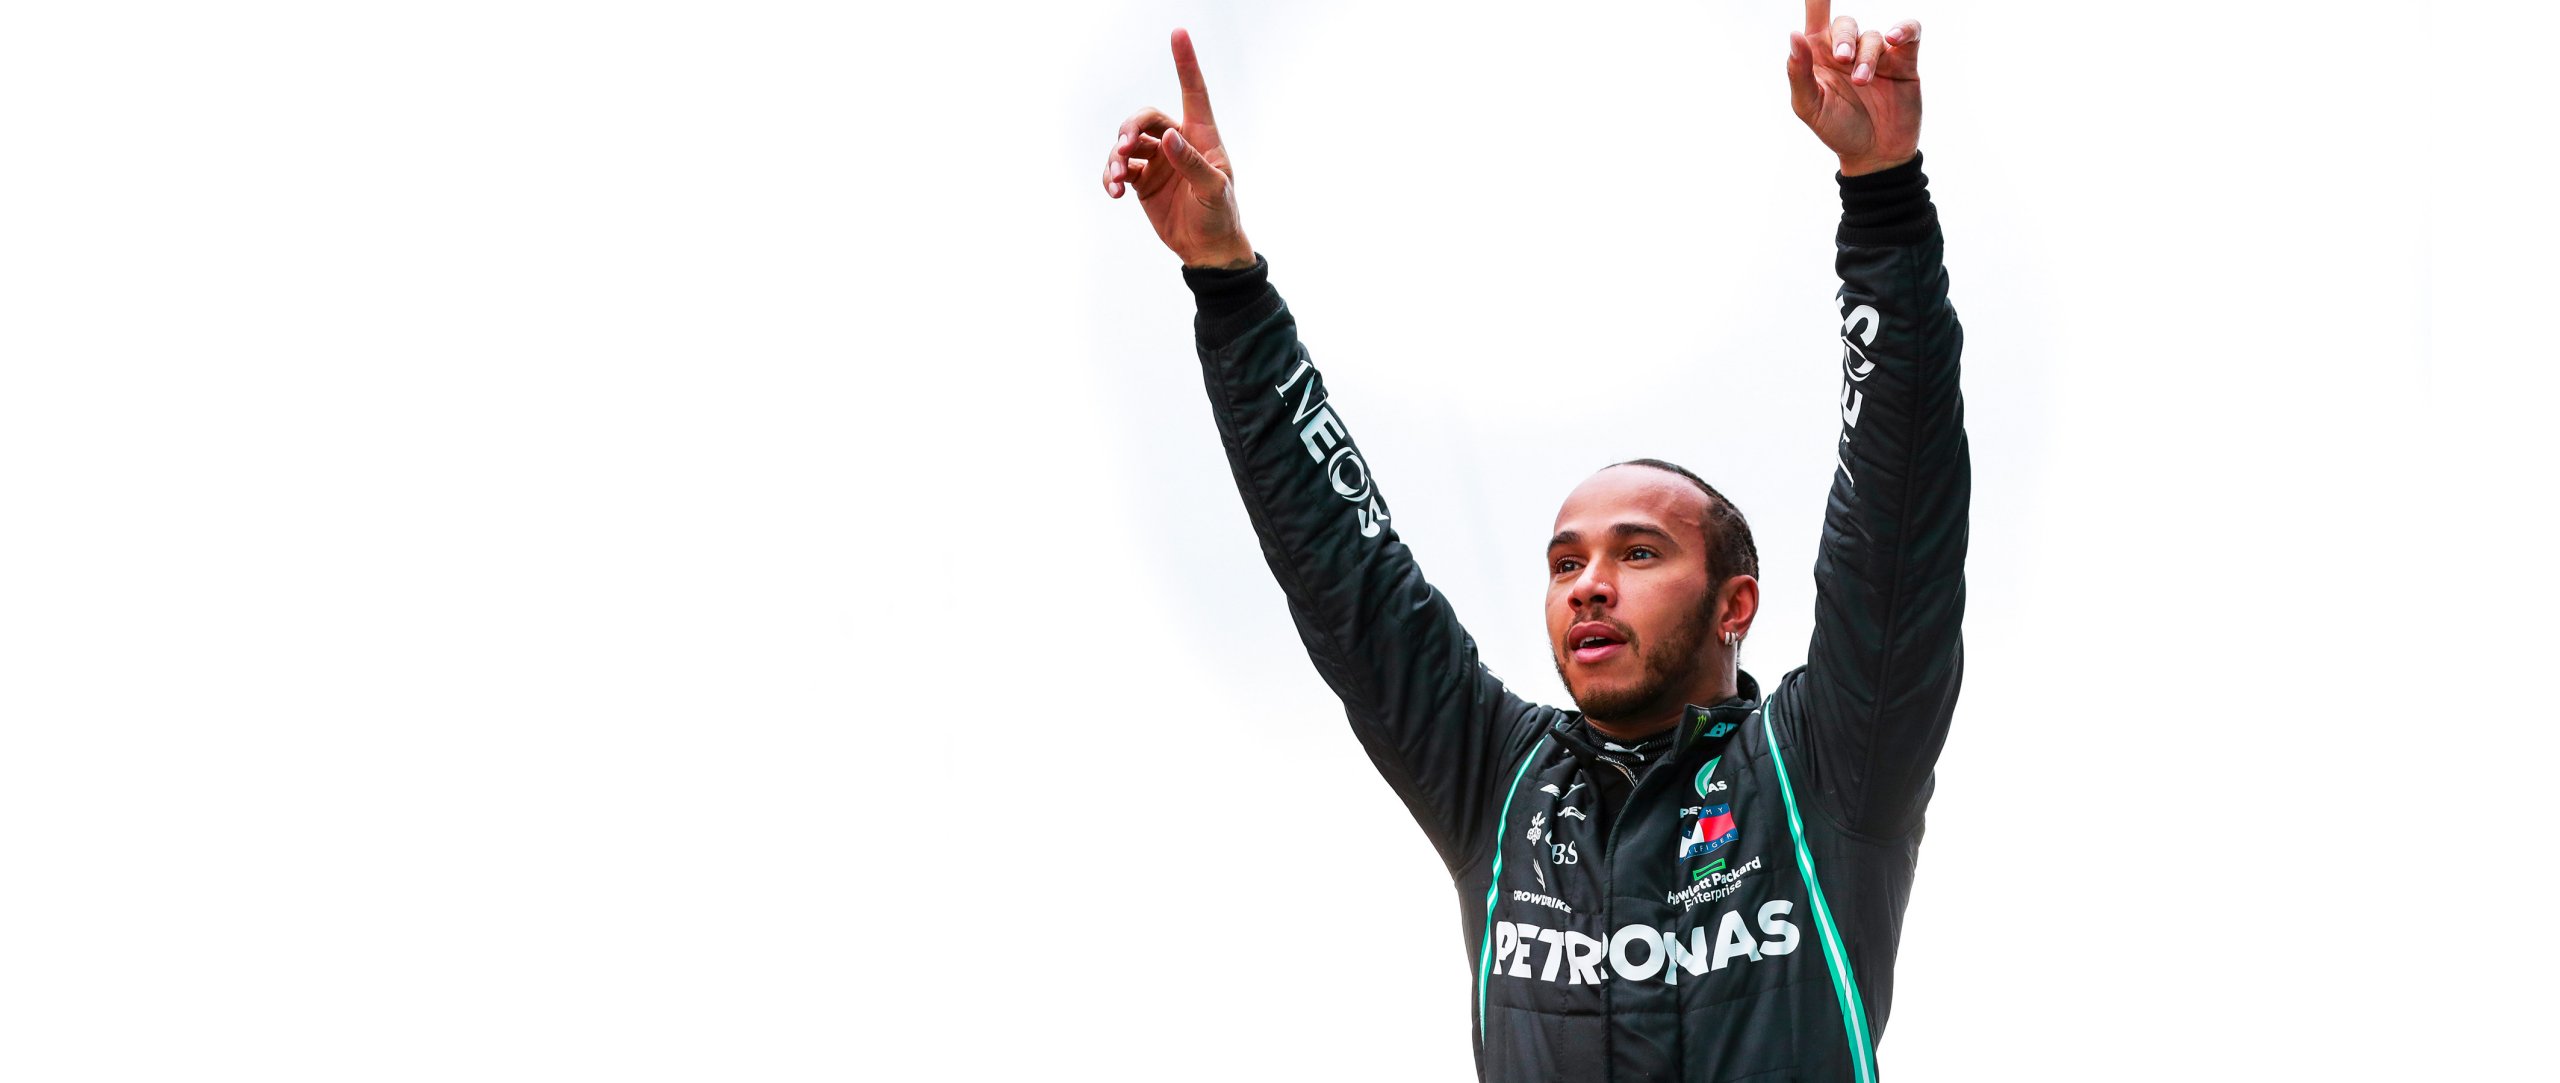 Seventh title 'beyond wildest dreams', admits Hamilton who says 'keeping  believing' key to Turkish GP triumph